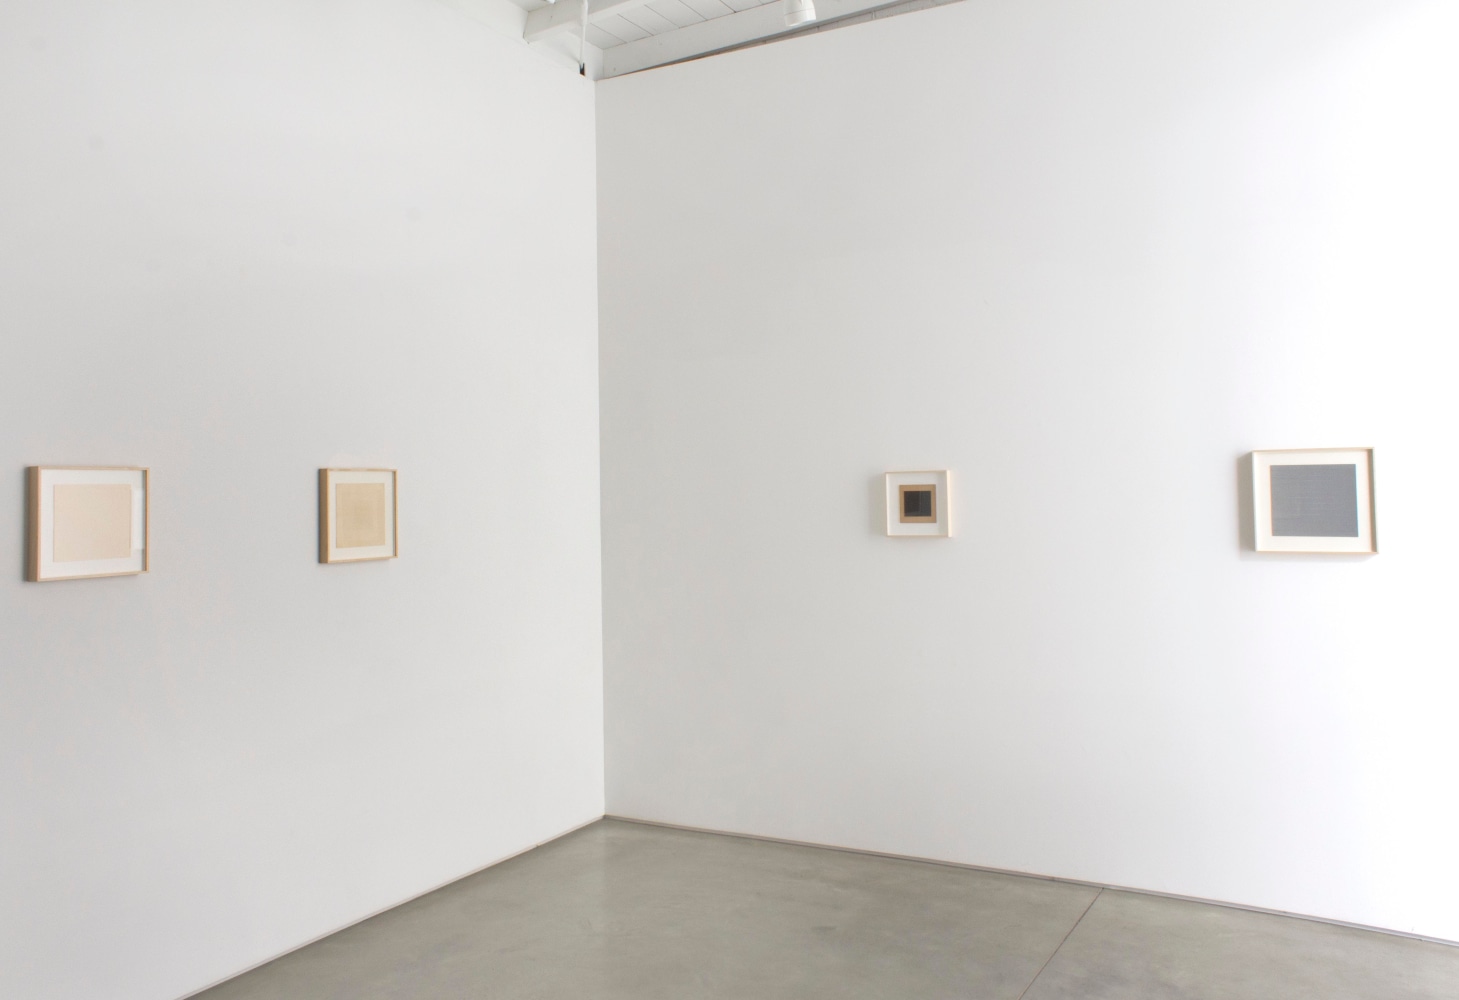 Robert Barry Paintings and Works on Paper from the 1960s​, installation view